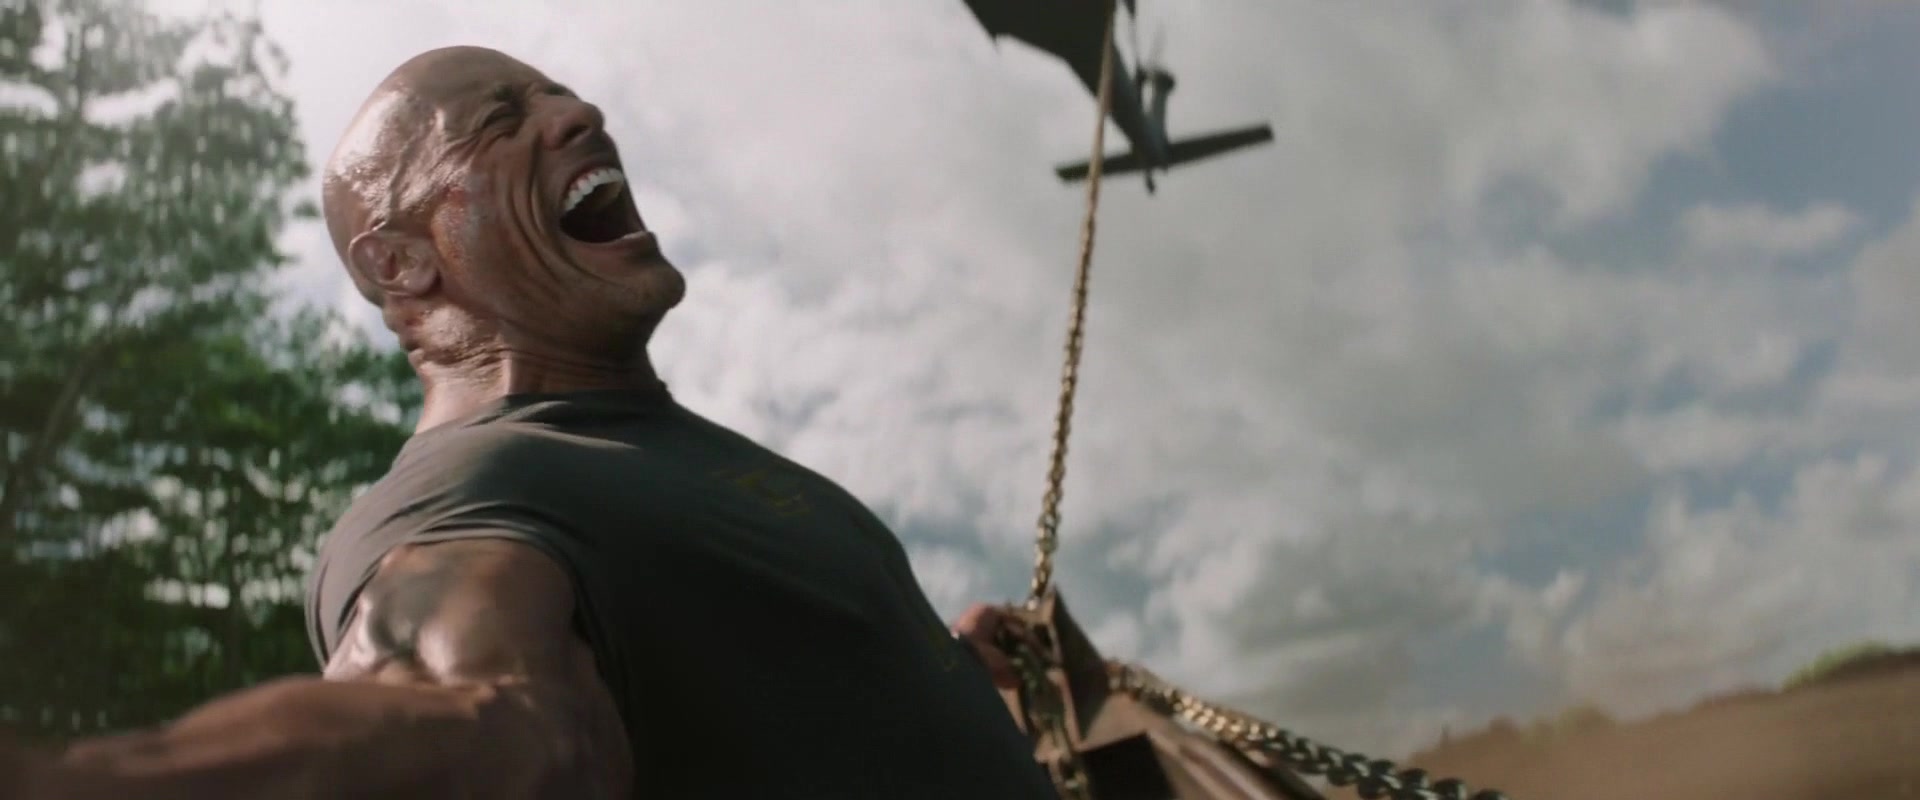 Lucas Hobbs (Dwayne 'The Rock' Johnson) takes hold of a helicopter in Fast & Furious Presents: Hobbs & Shaw (2019), Universal Pictures